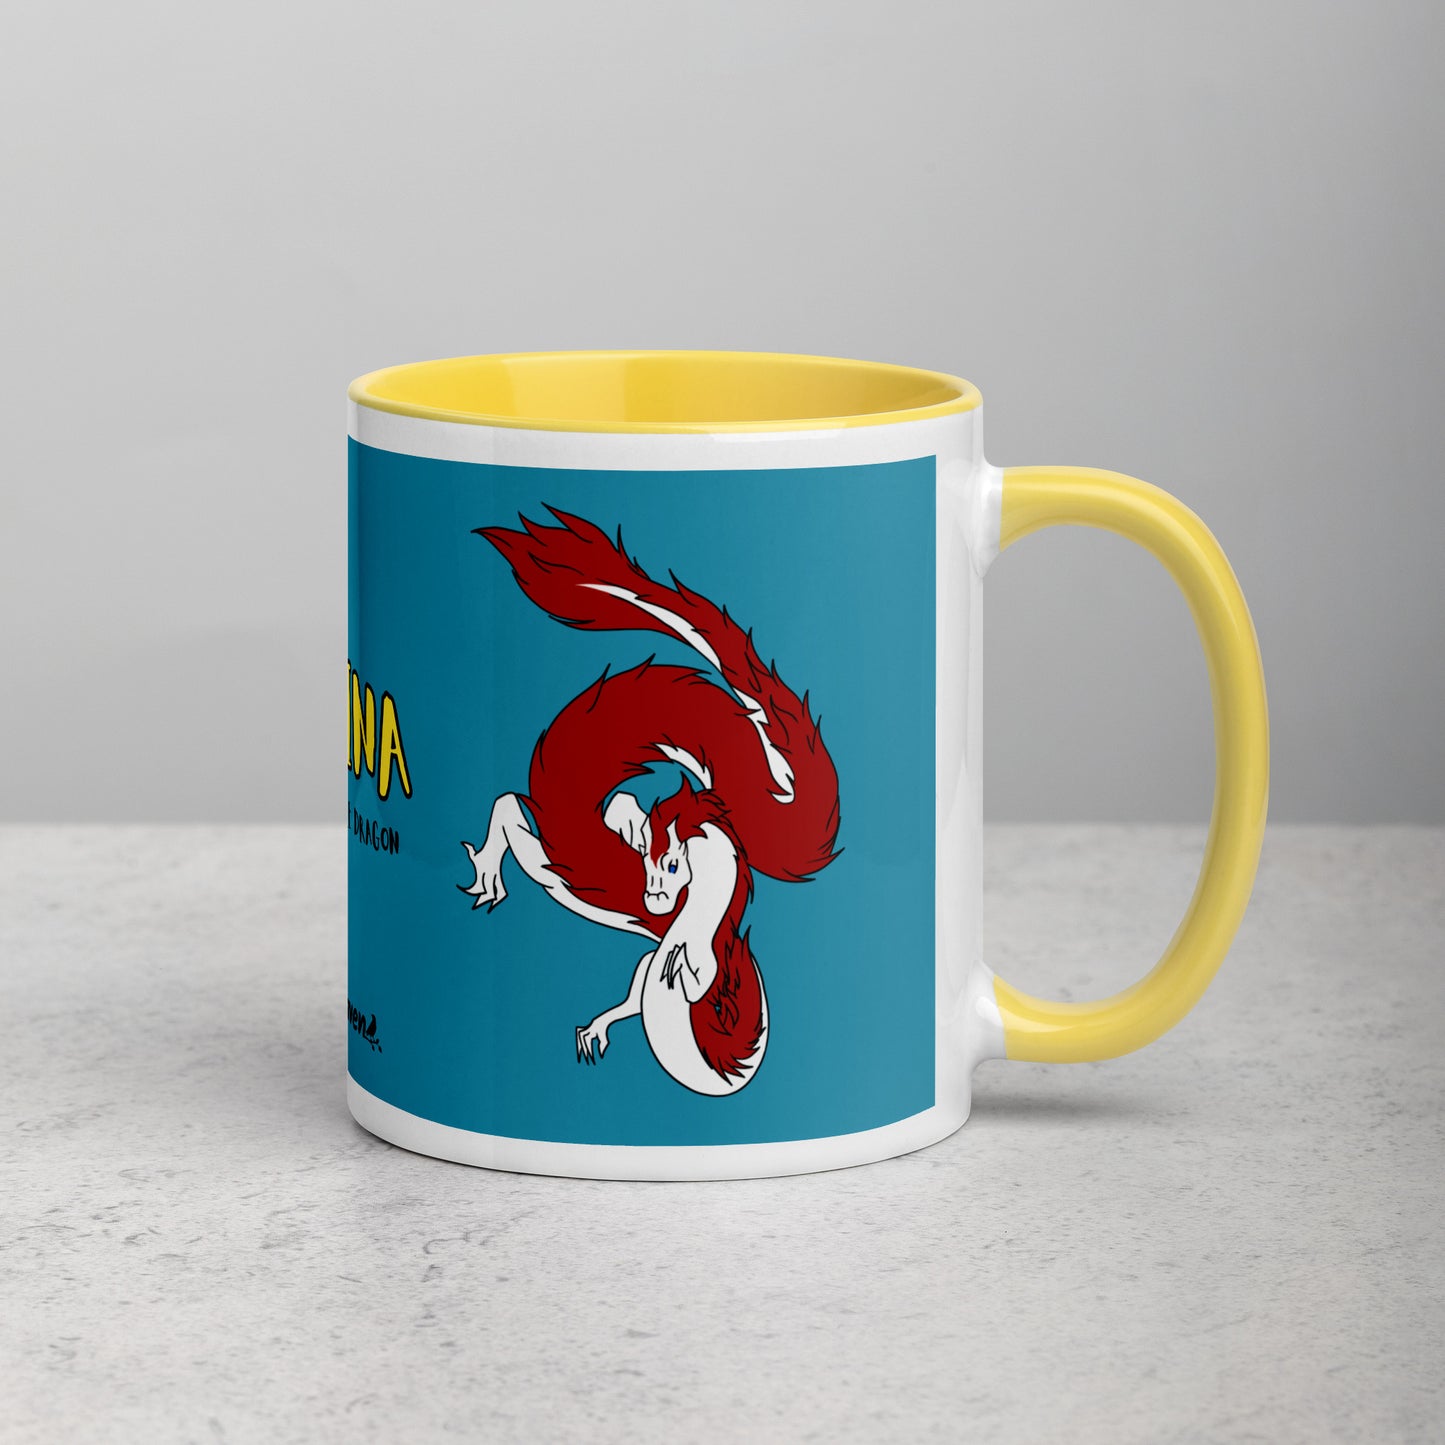 11 ounce ceramic mug with yellow handle, rim and inside color. Features double-sided image of Loraina the Fuzzy Noodle Dragon on a dark blue background. Mug is microwave and dishwasher safe.